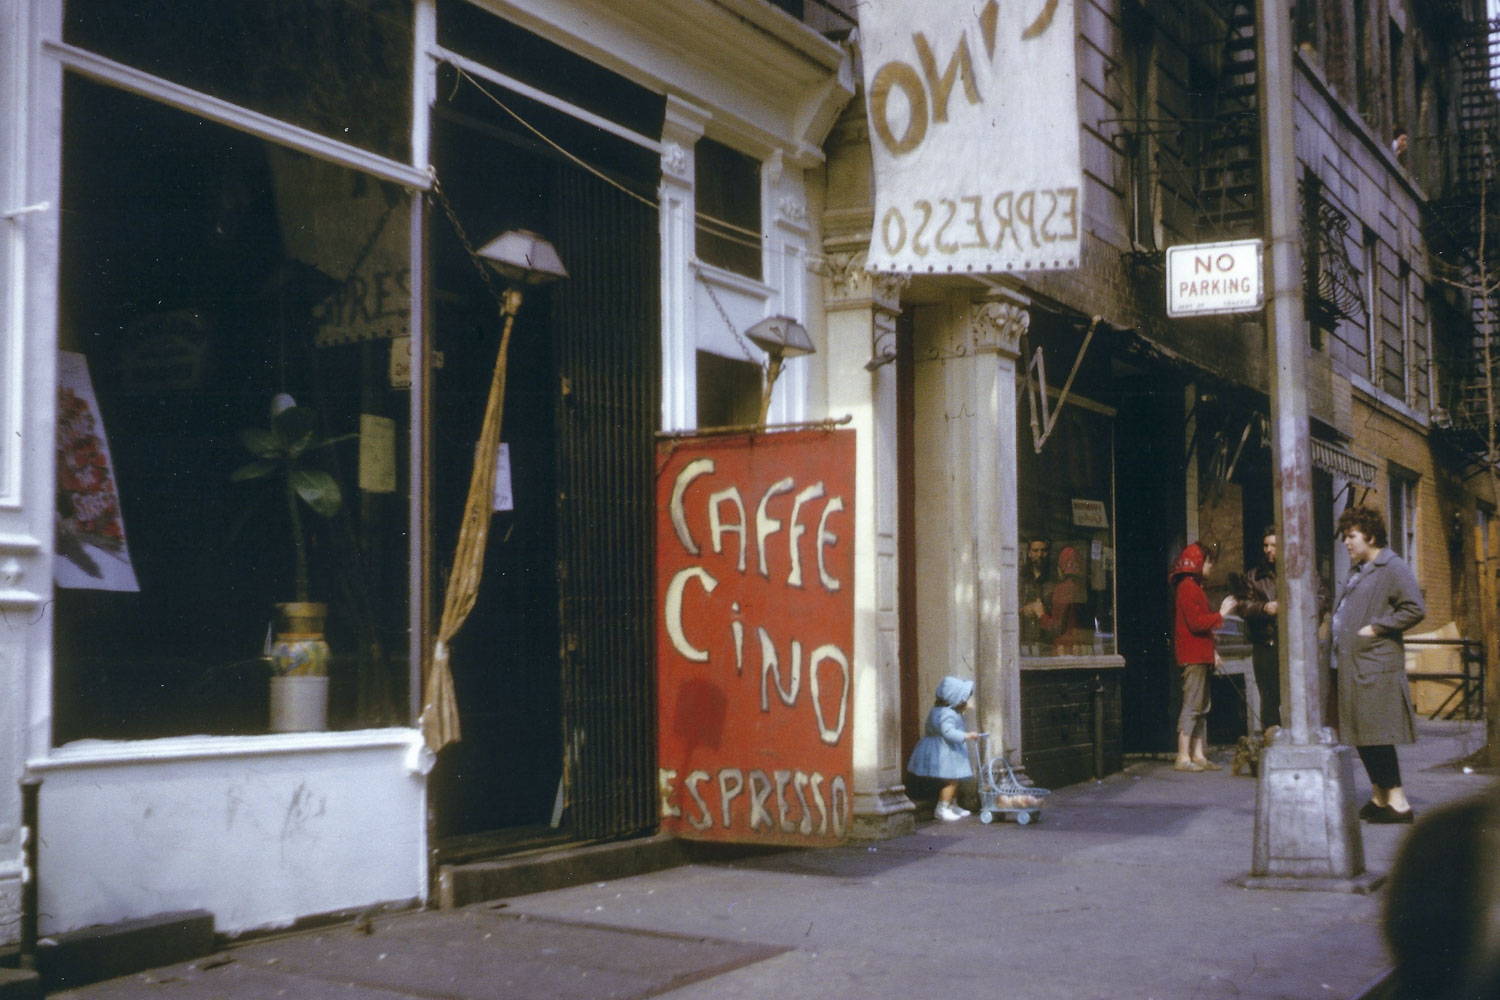 Caffe Cino sign from 1962 outside of the Caffe Cino